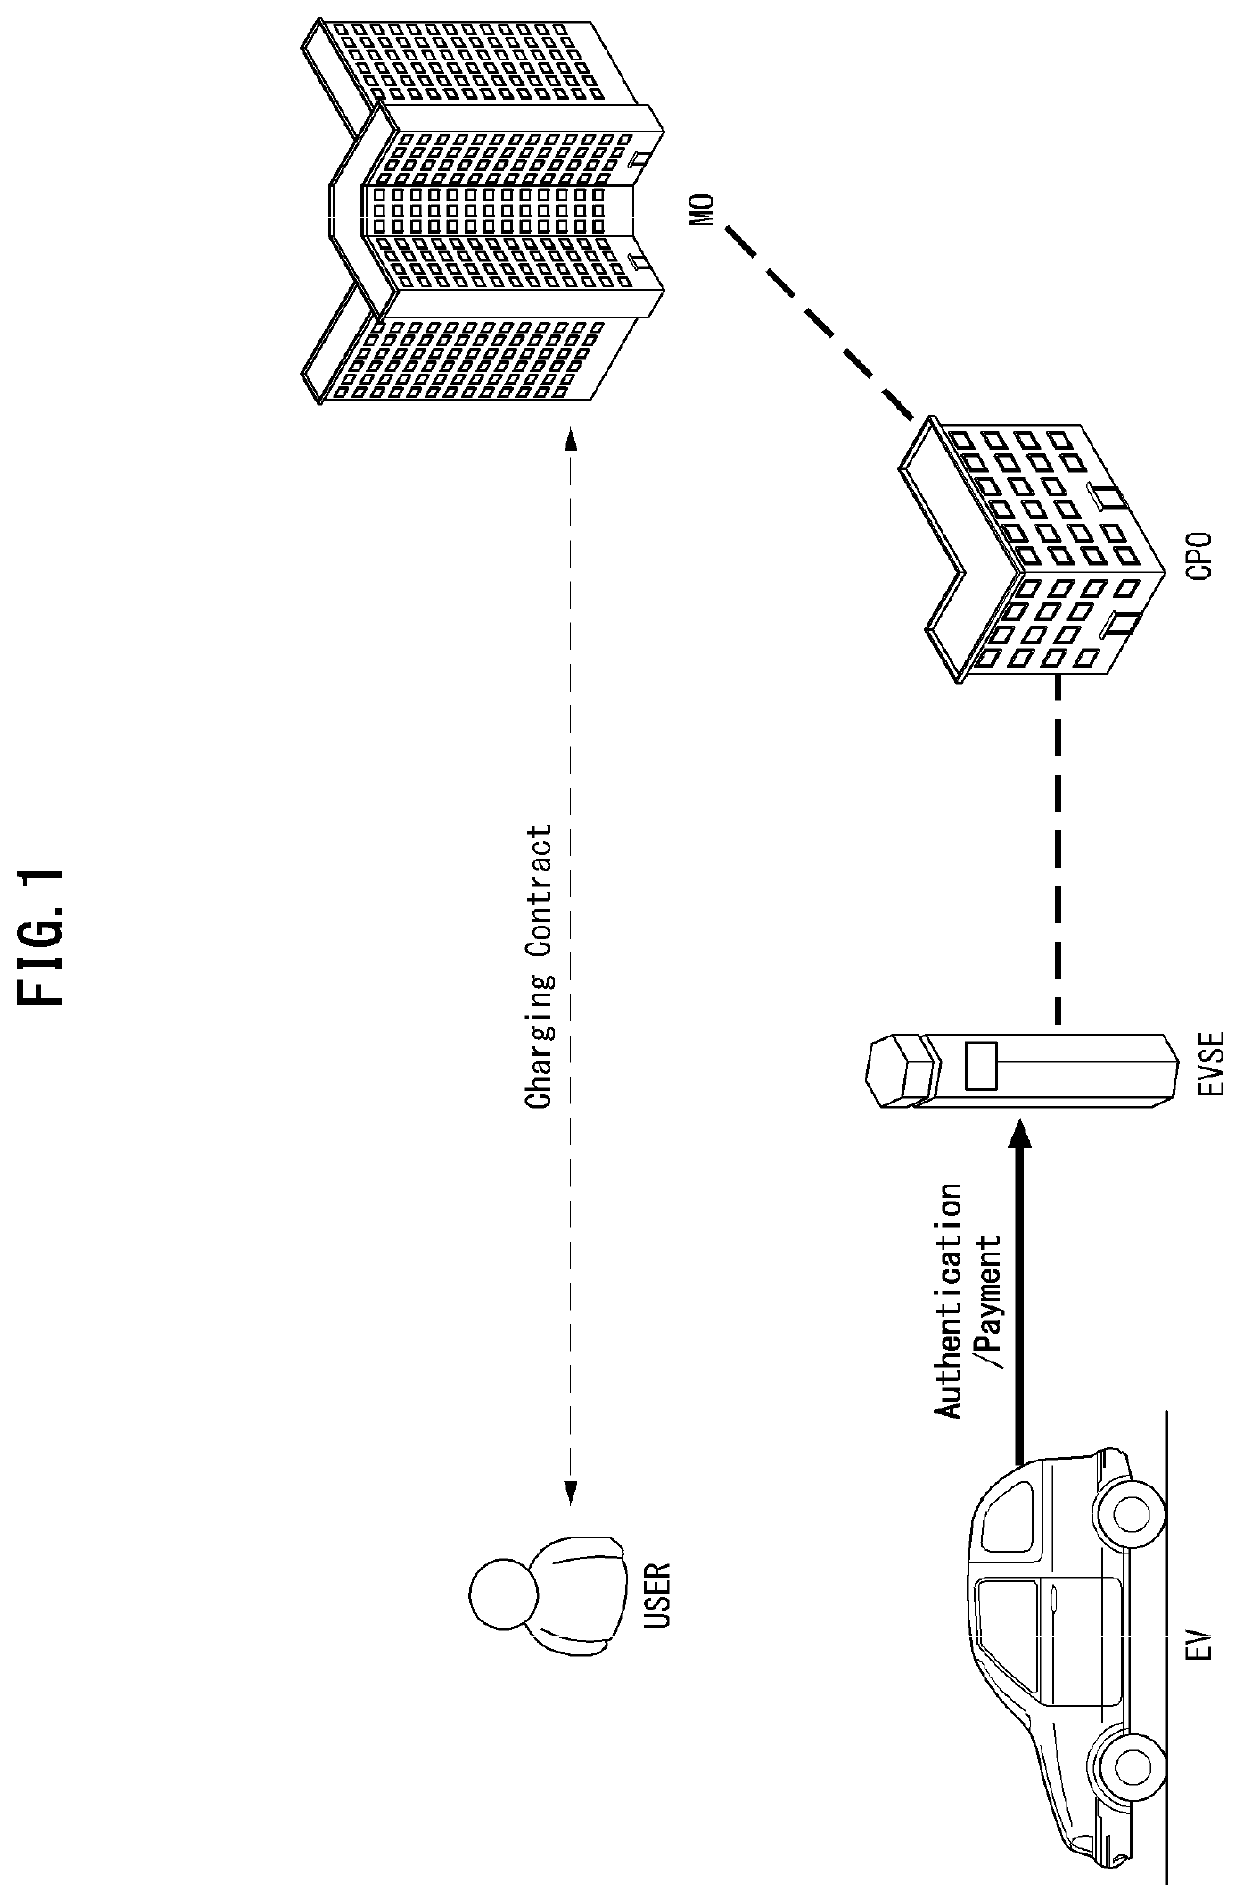 Method and apparatus for automatically authenticating electric vehicle charging user based on blockchain